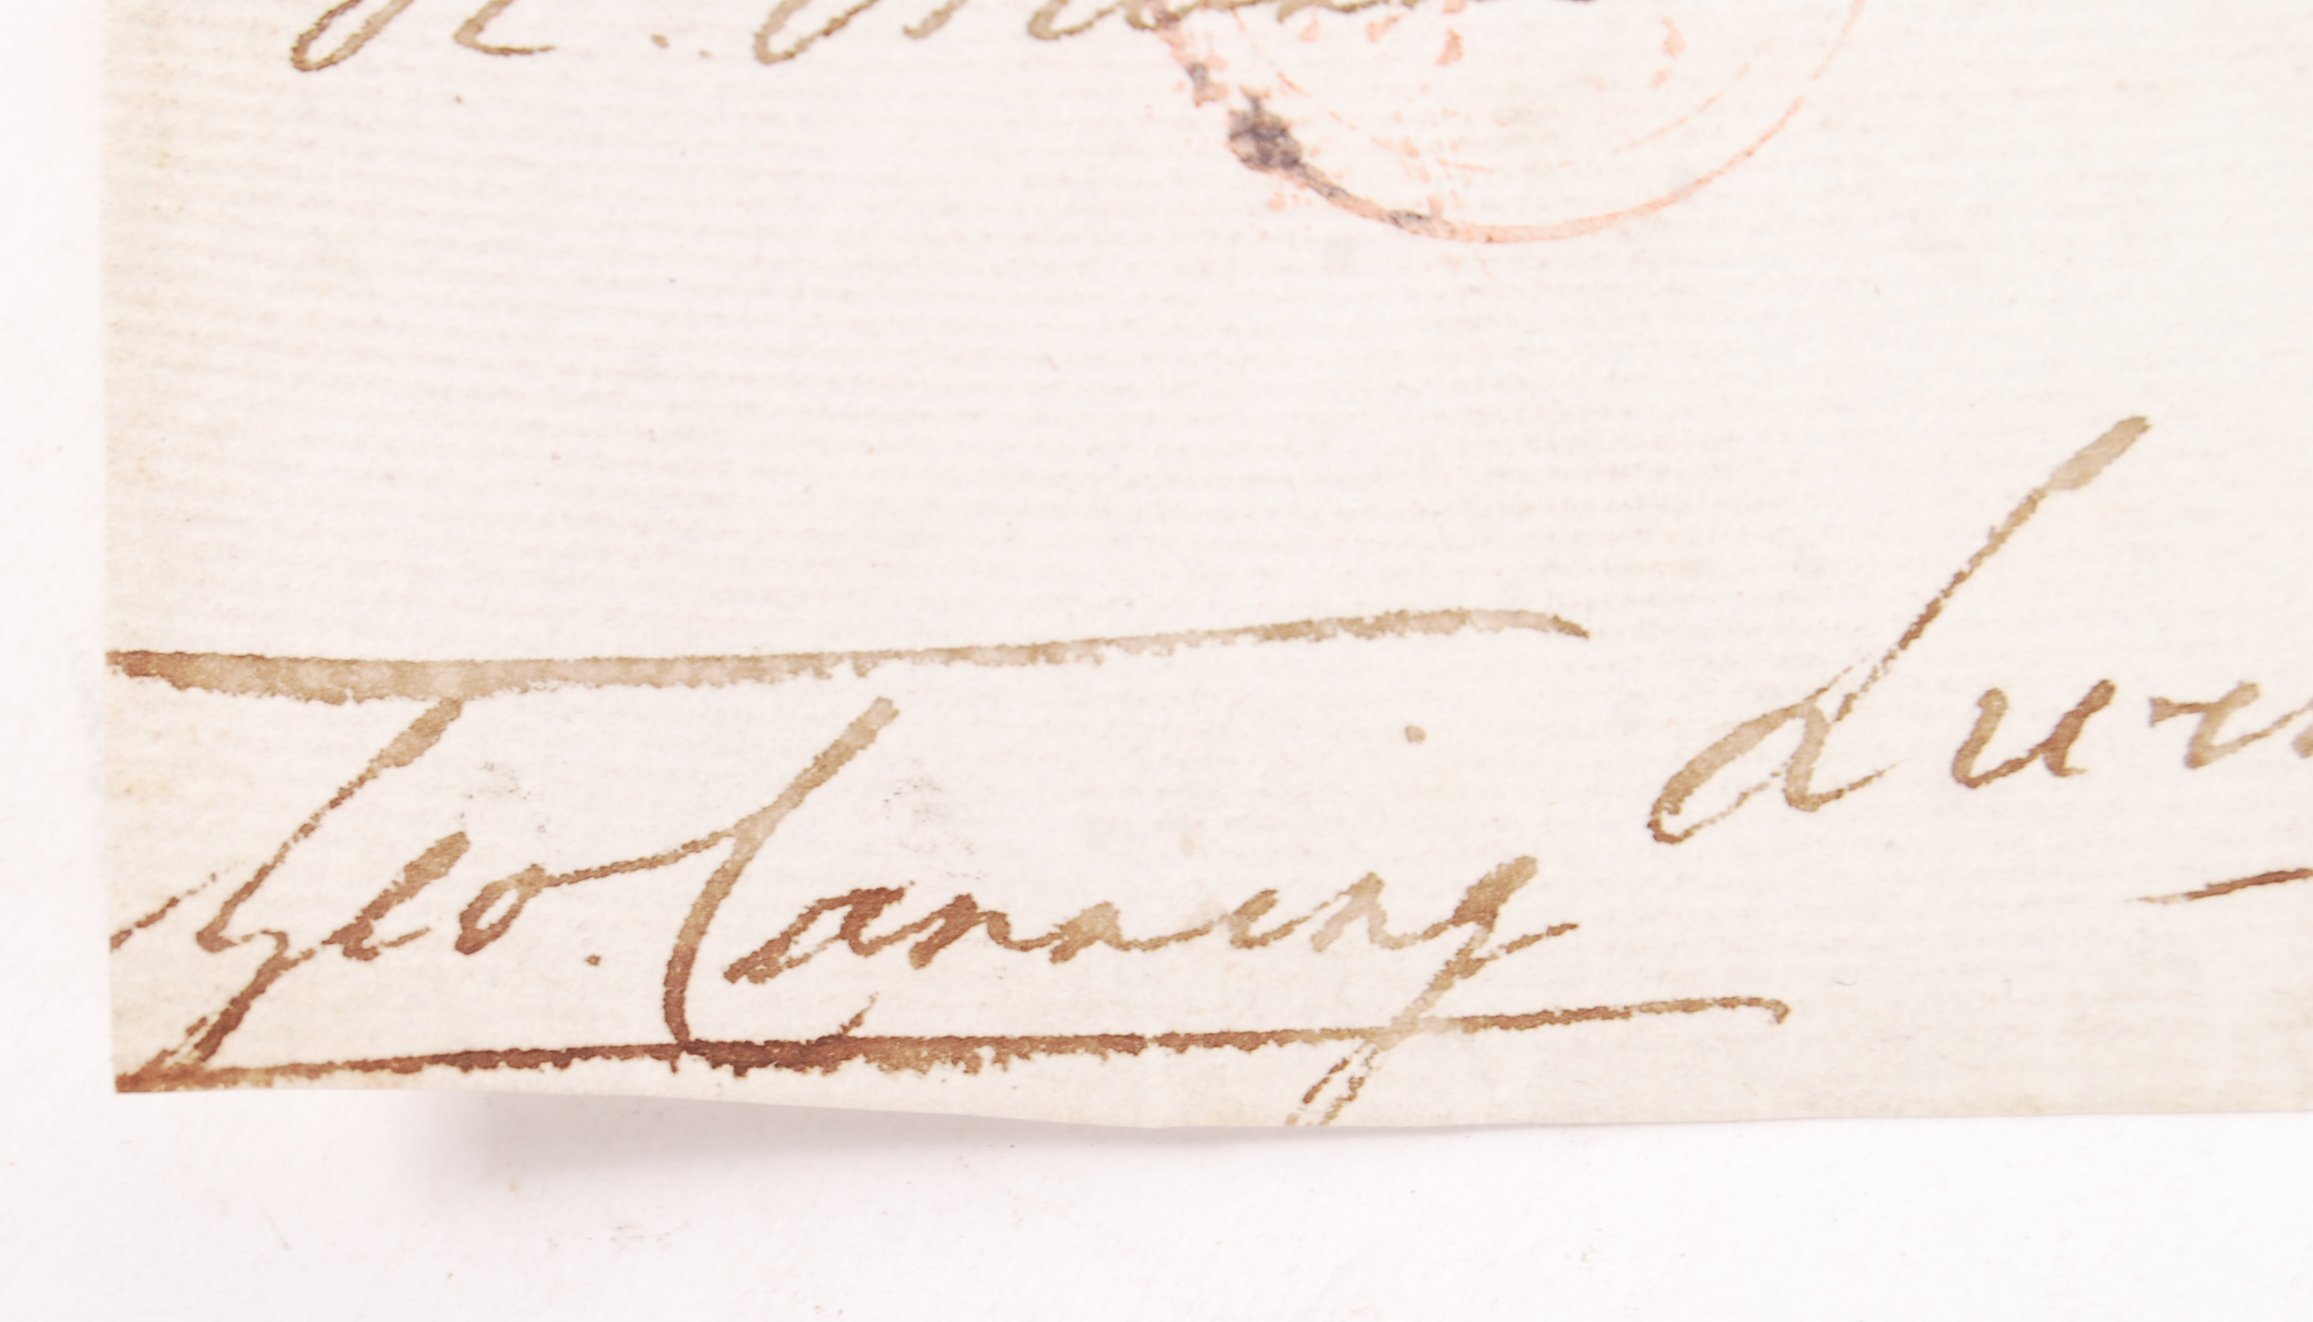 GEORGE CANNING - BRITISH PRIME MINISTER - AUTOGRAPH - Image 3 of 3